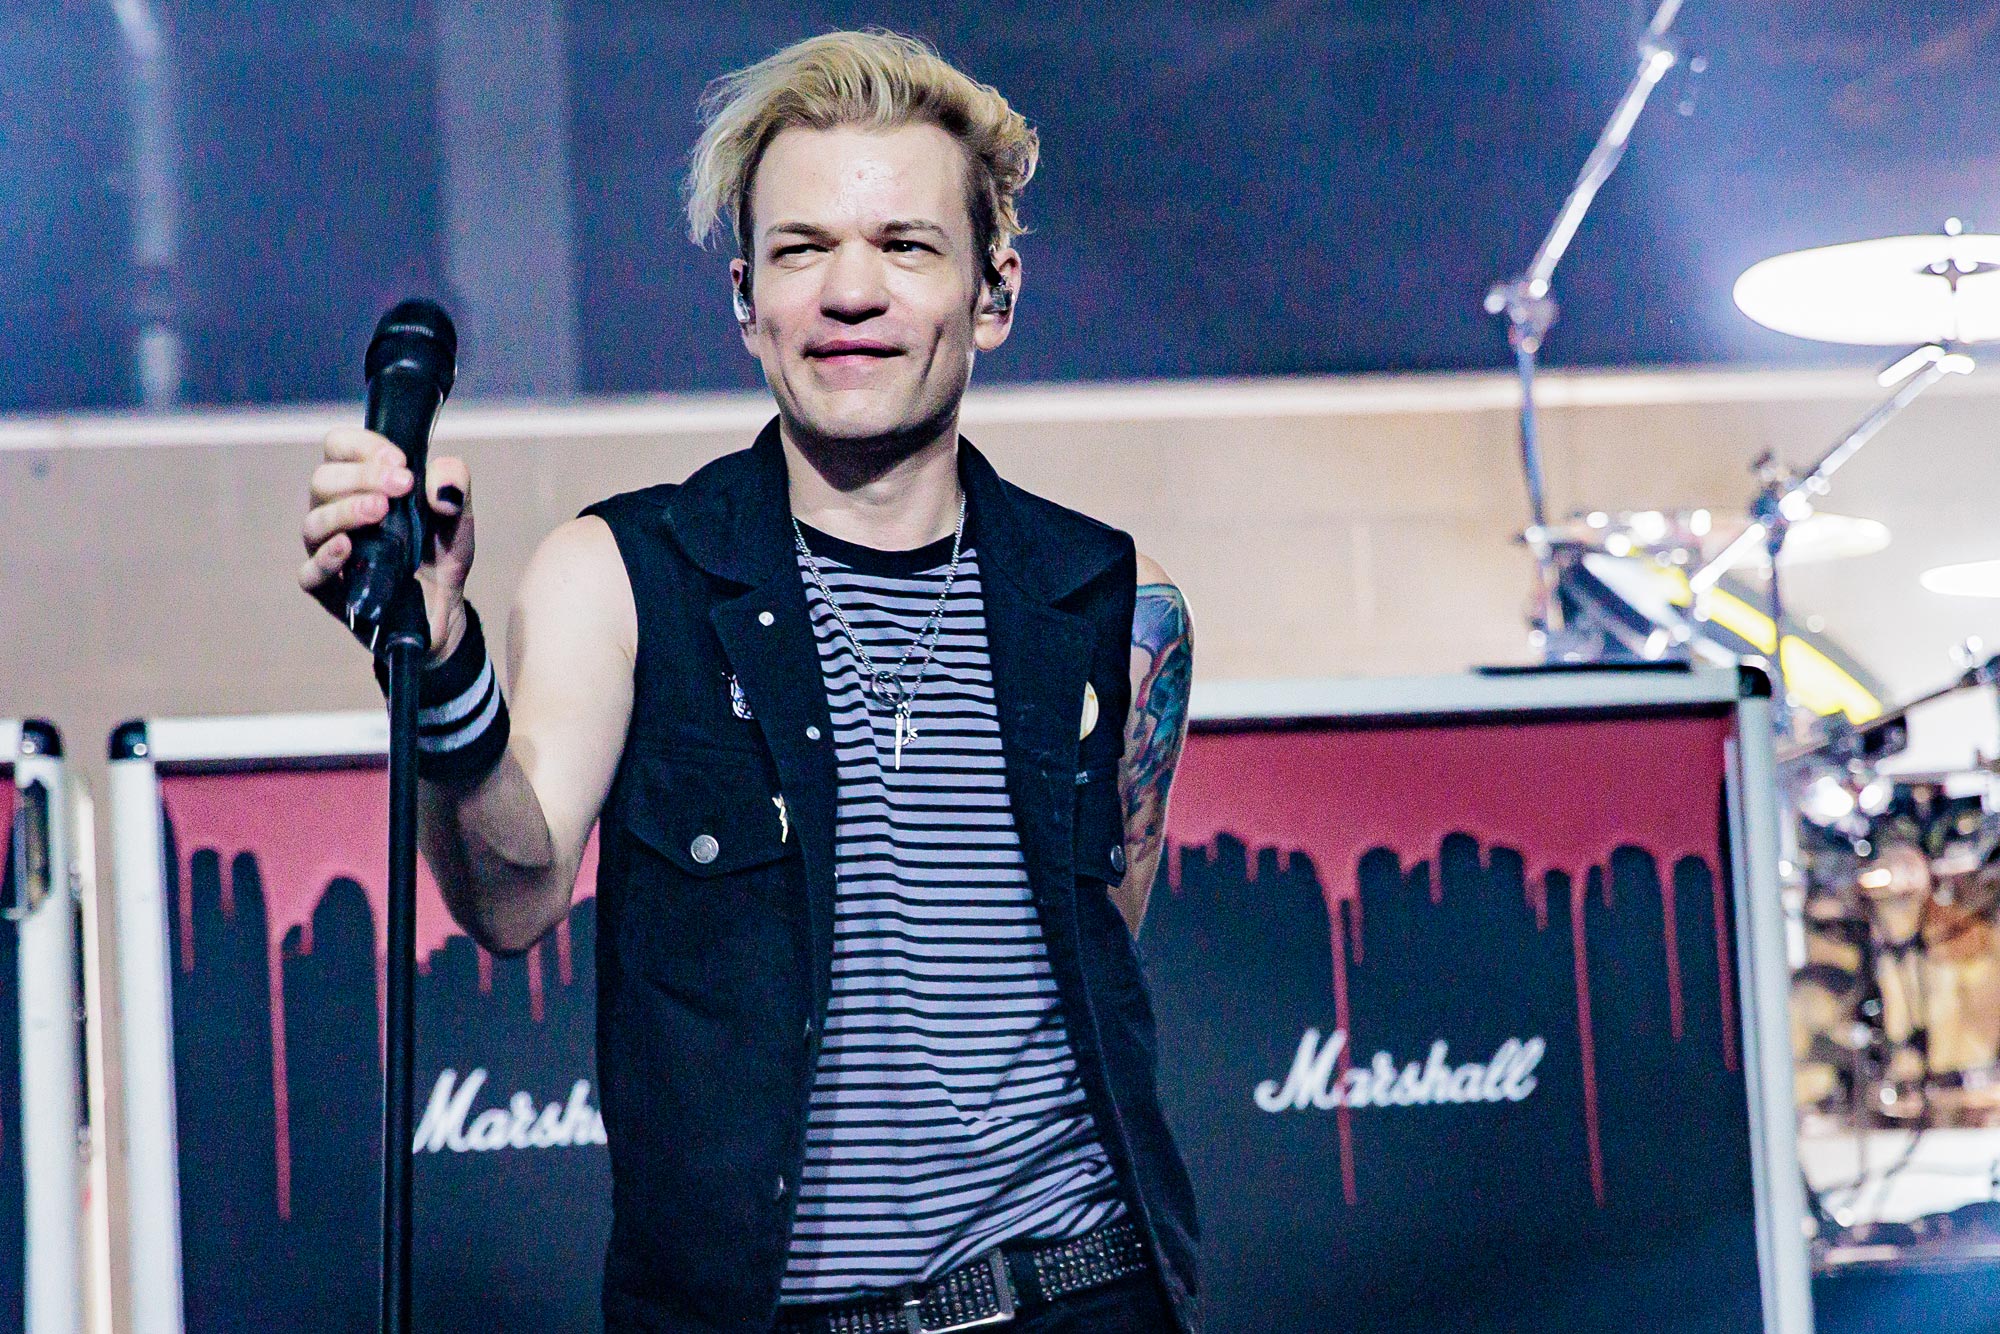 Sum 41 singer Deryck Whibley gets married one year after serious